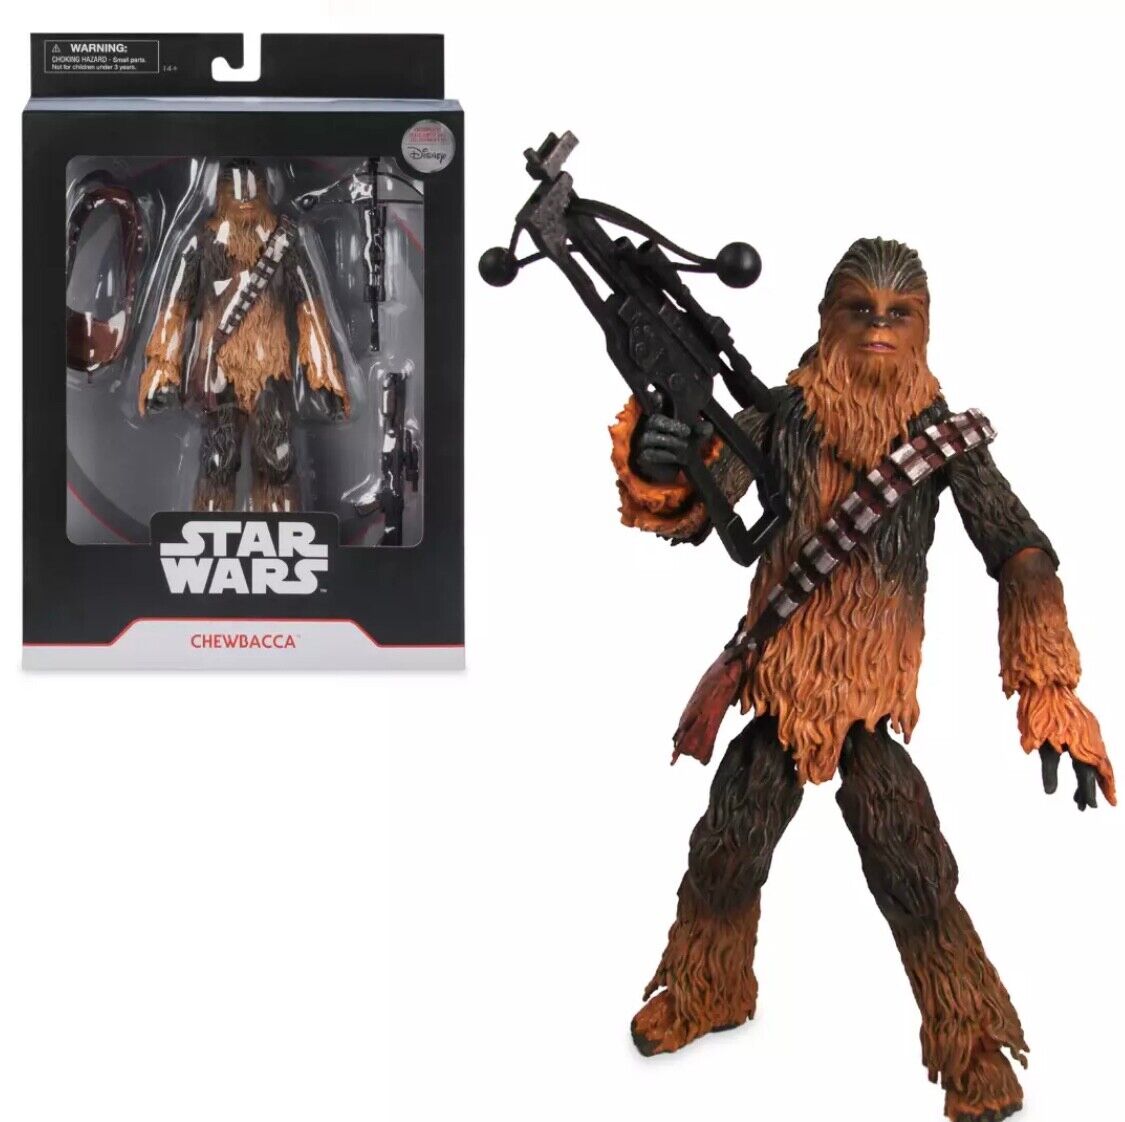 Diamond Select Disney Parks Chewbacca Deluxe Action Figure - New - 